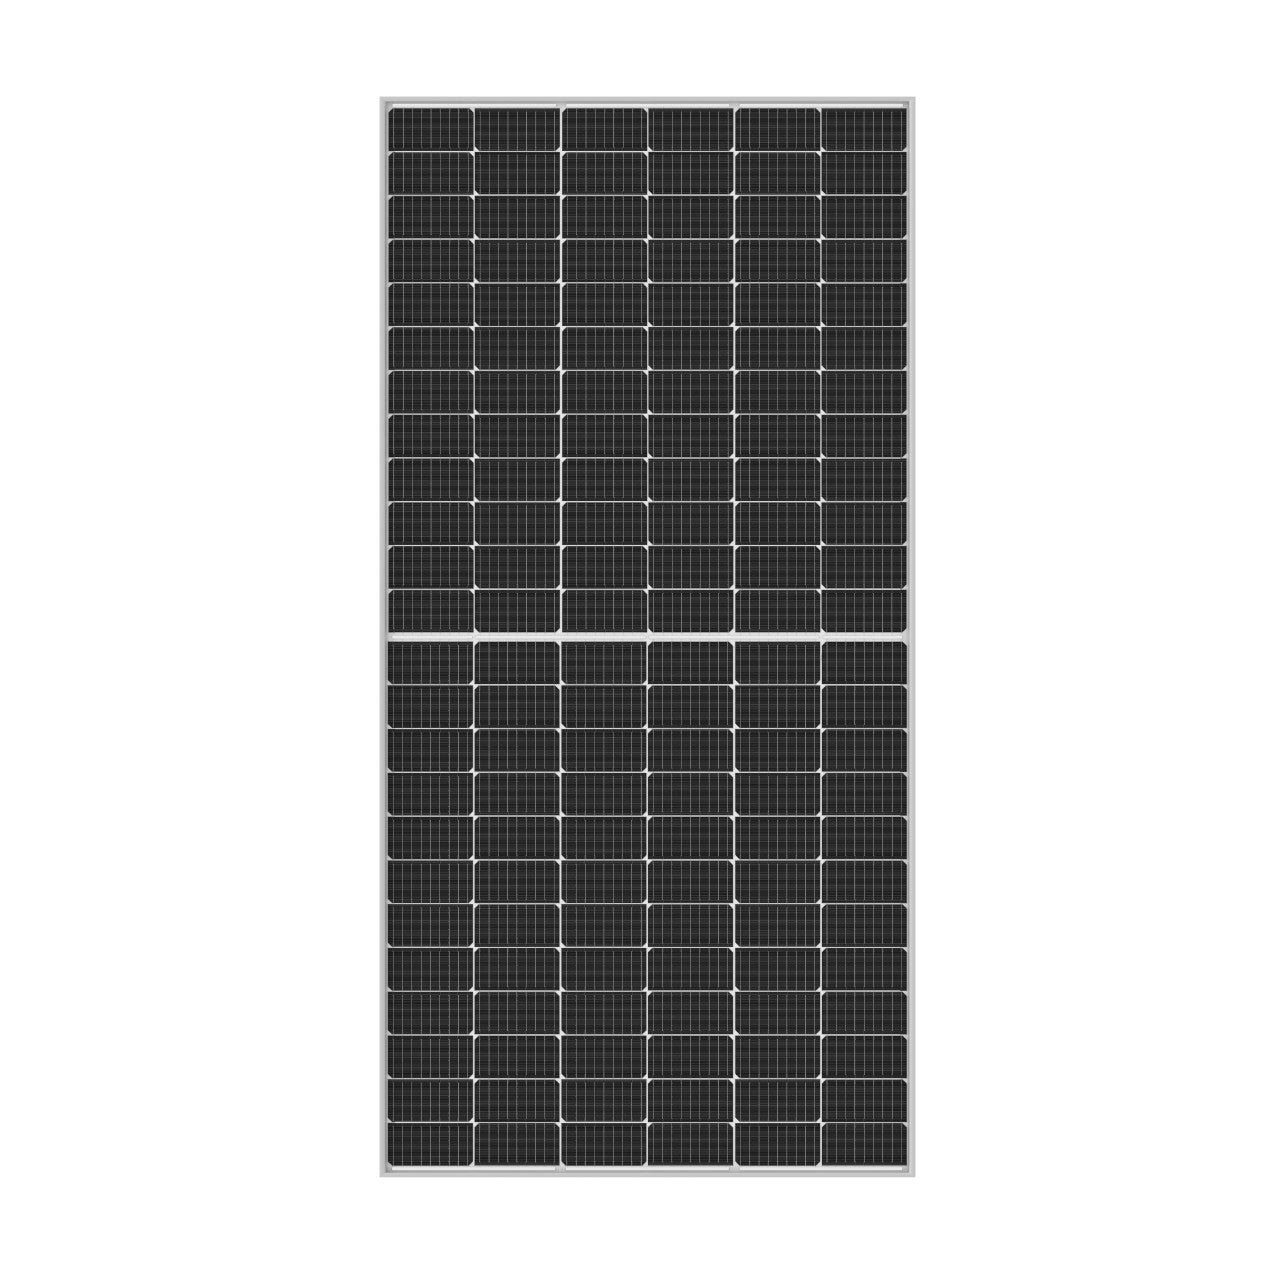 Canadian Solar -35x Panels -  CS6R-405MS- 405W - 54 Cell｜2-4 Weeks Ship Time